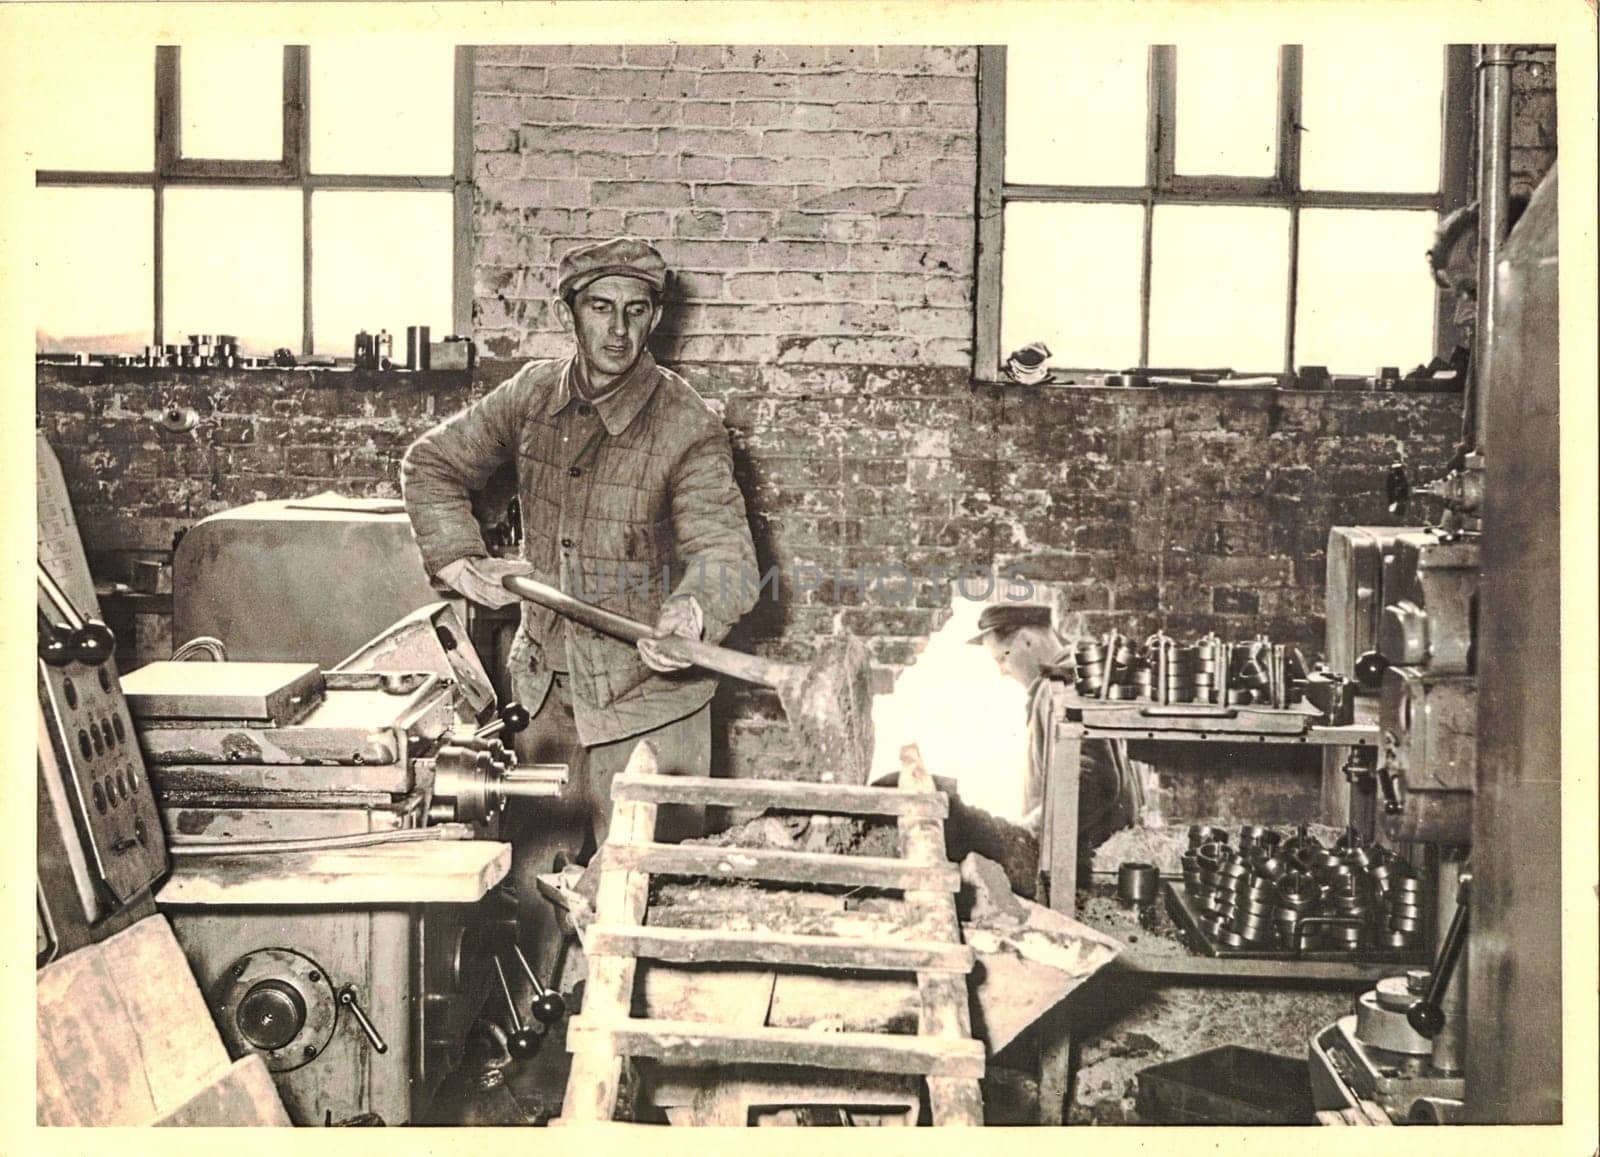 FRAUREUTH, EAST GERMANY - MARCH 3, 1965: Worker in factory. Retro photo from former East Germany.